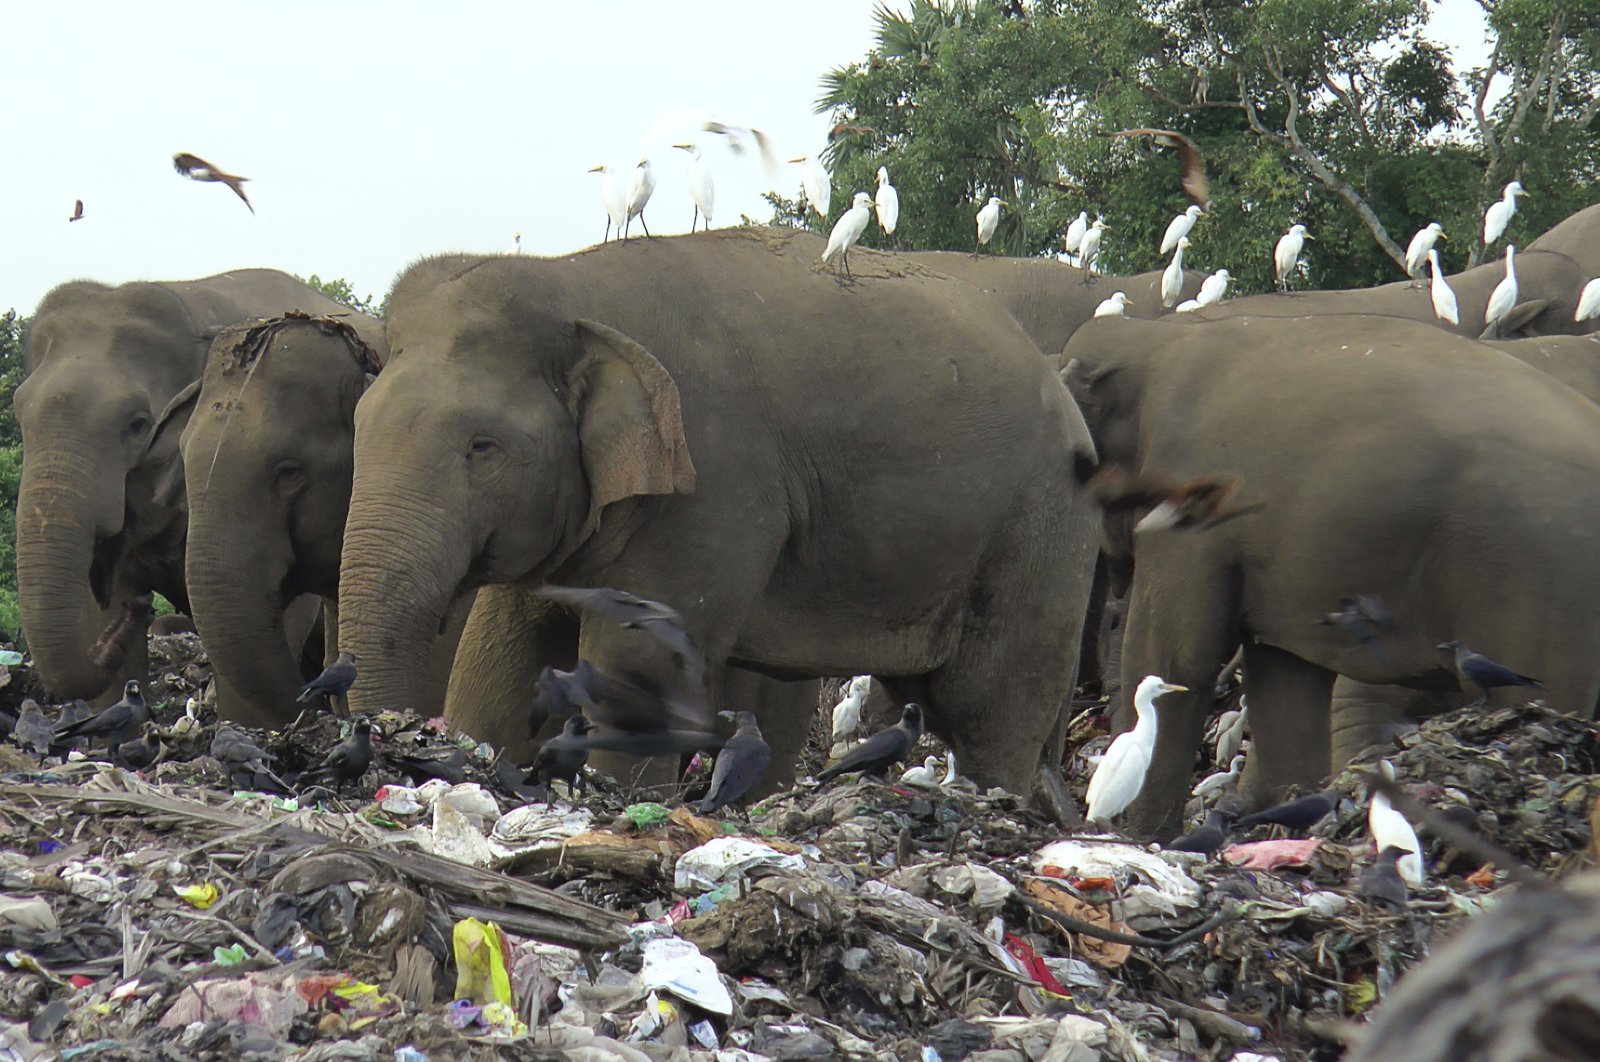 Wild elephants scavenge for food at an open landfill in Pallakkadu village in Ampara district, about 210 kilometers (130 miles) east of the capital Colombo, Sri Lanka, Jan. 6, 2022. (AP Photo)